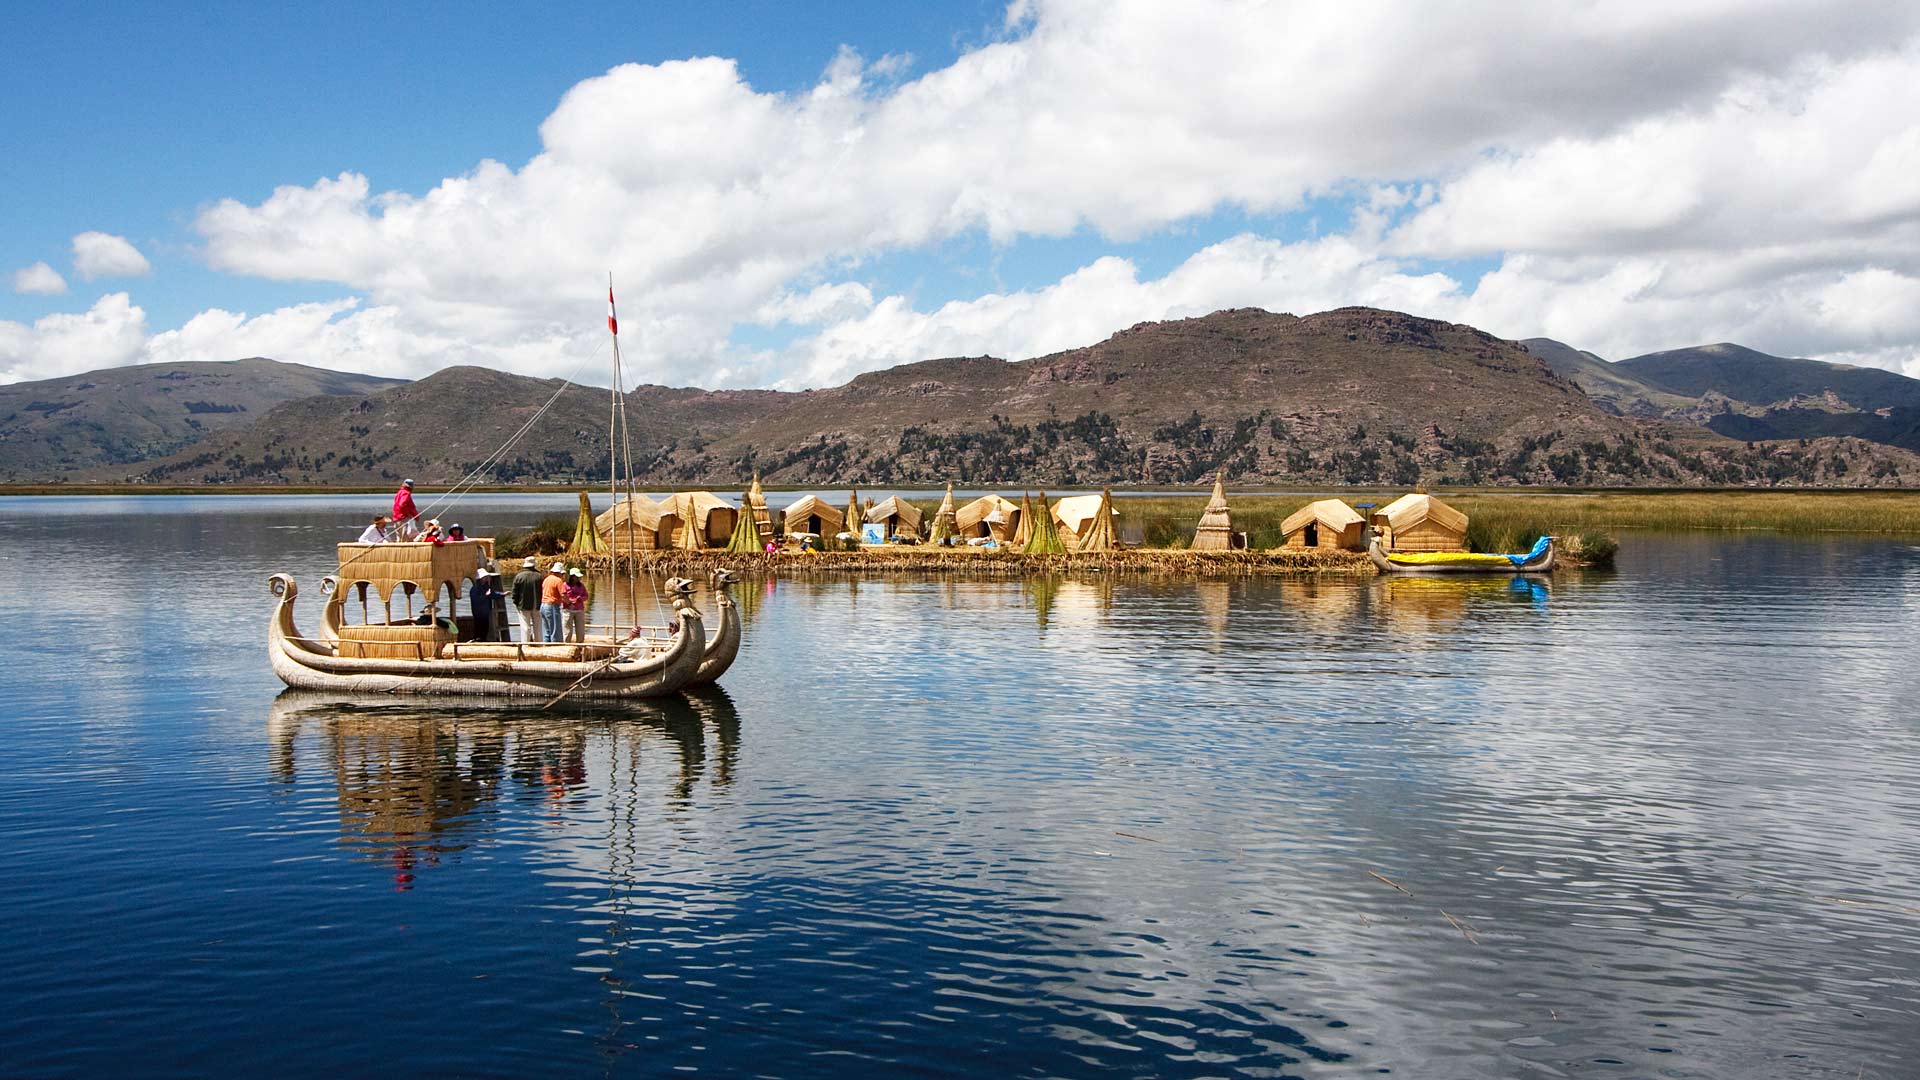 Totora (hollow reed) boat by a floating man-made totora island inhabitated by the Uro people in Lake Titicaca, near Puno